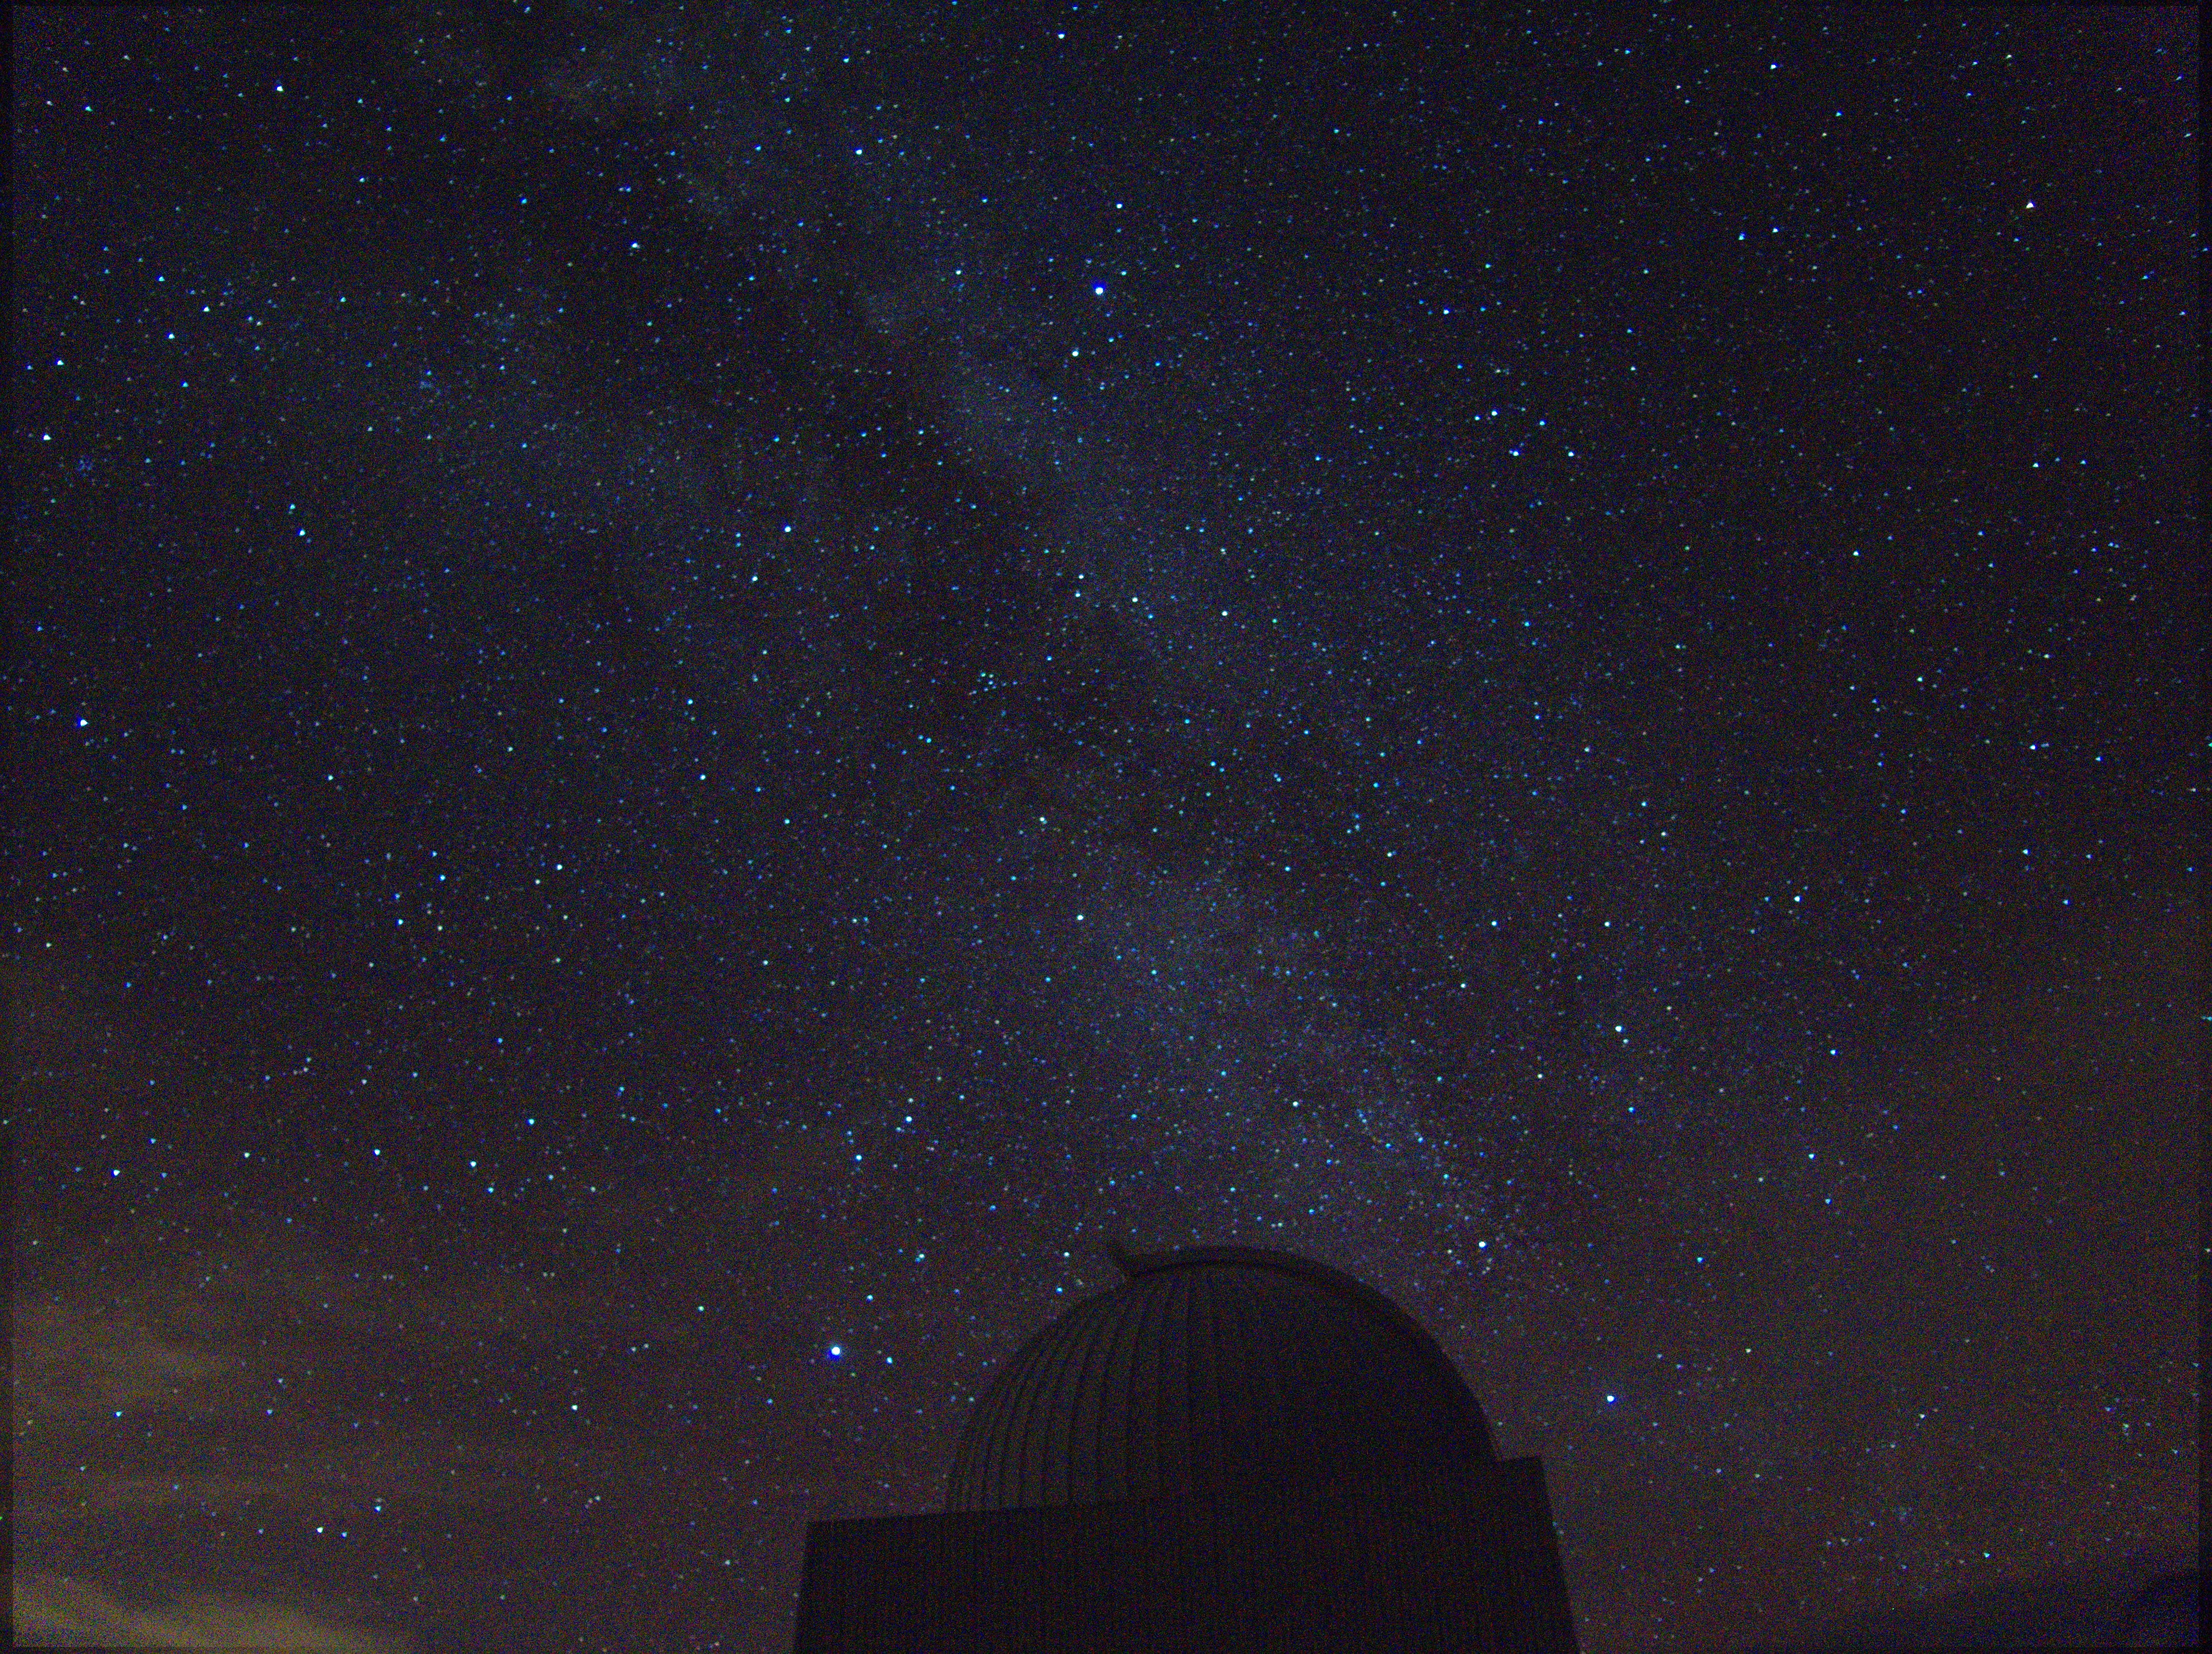 Milky Way over one of the domes